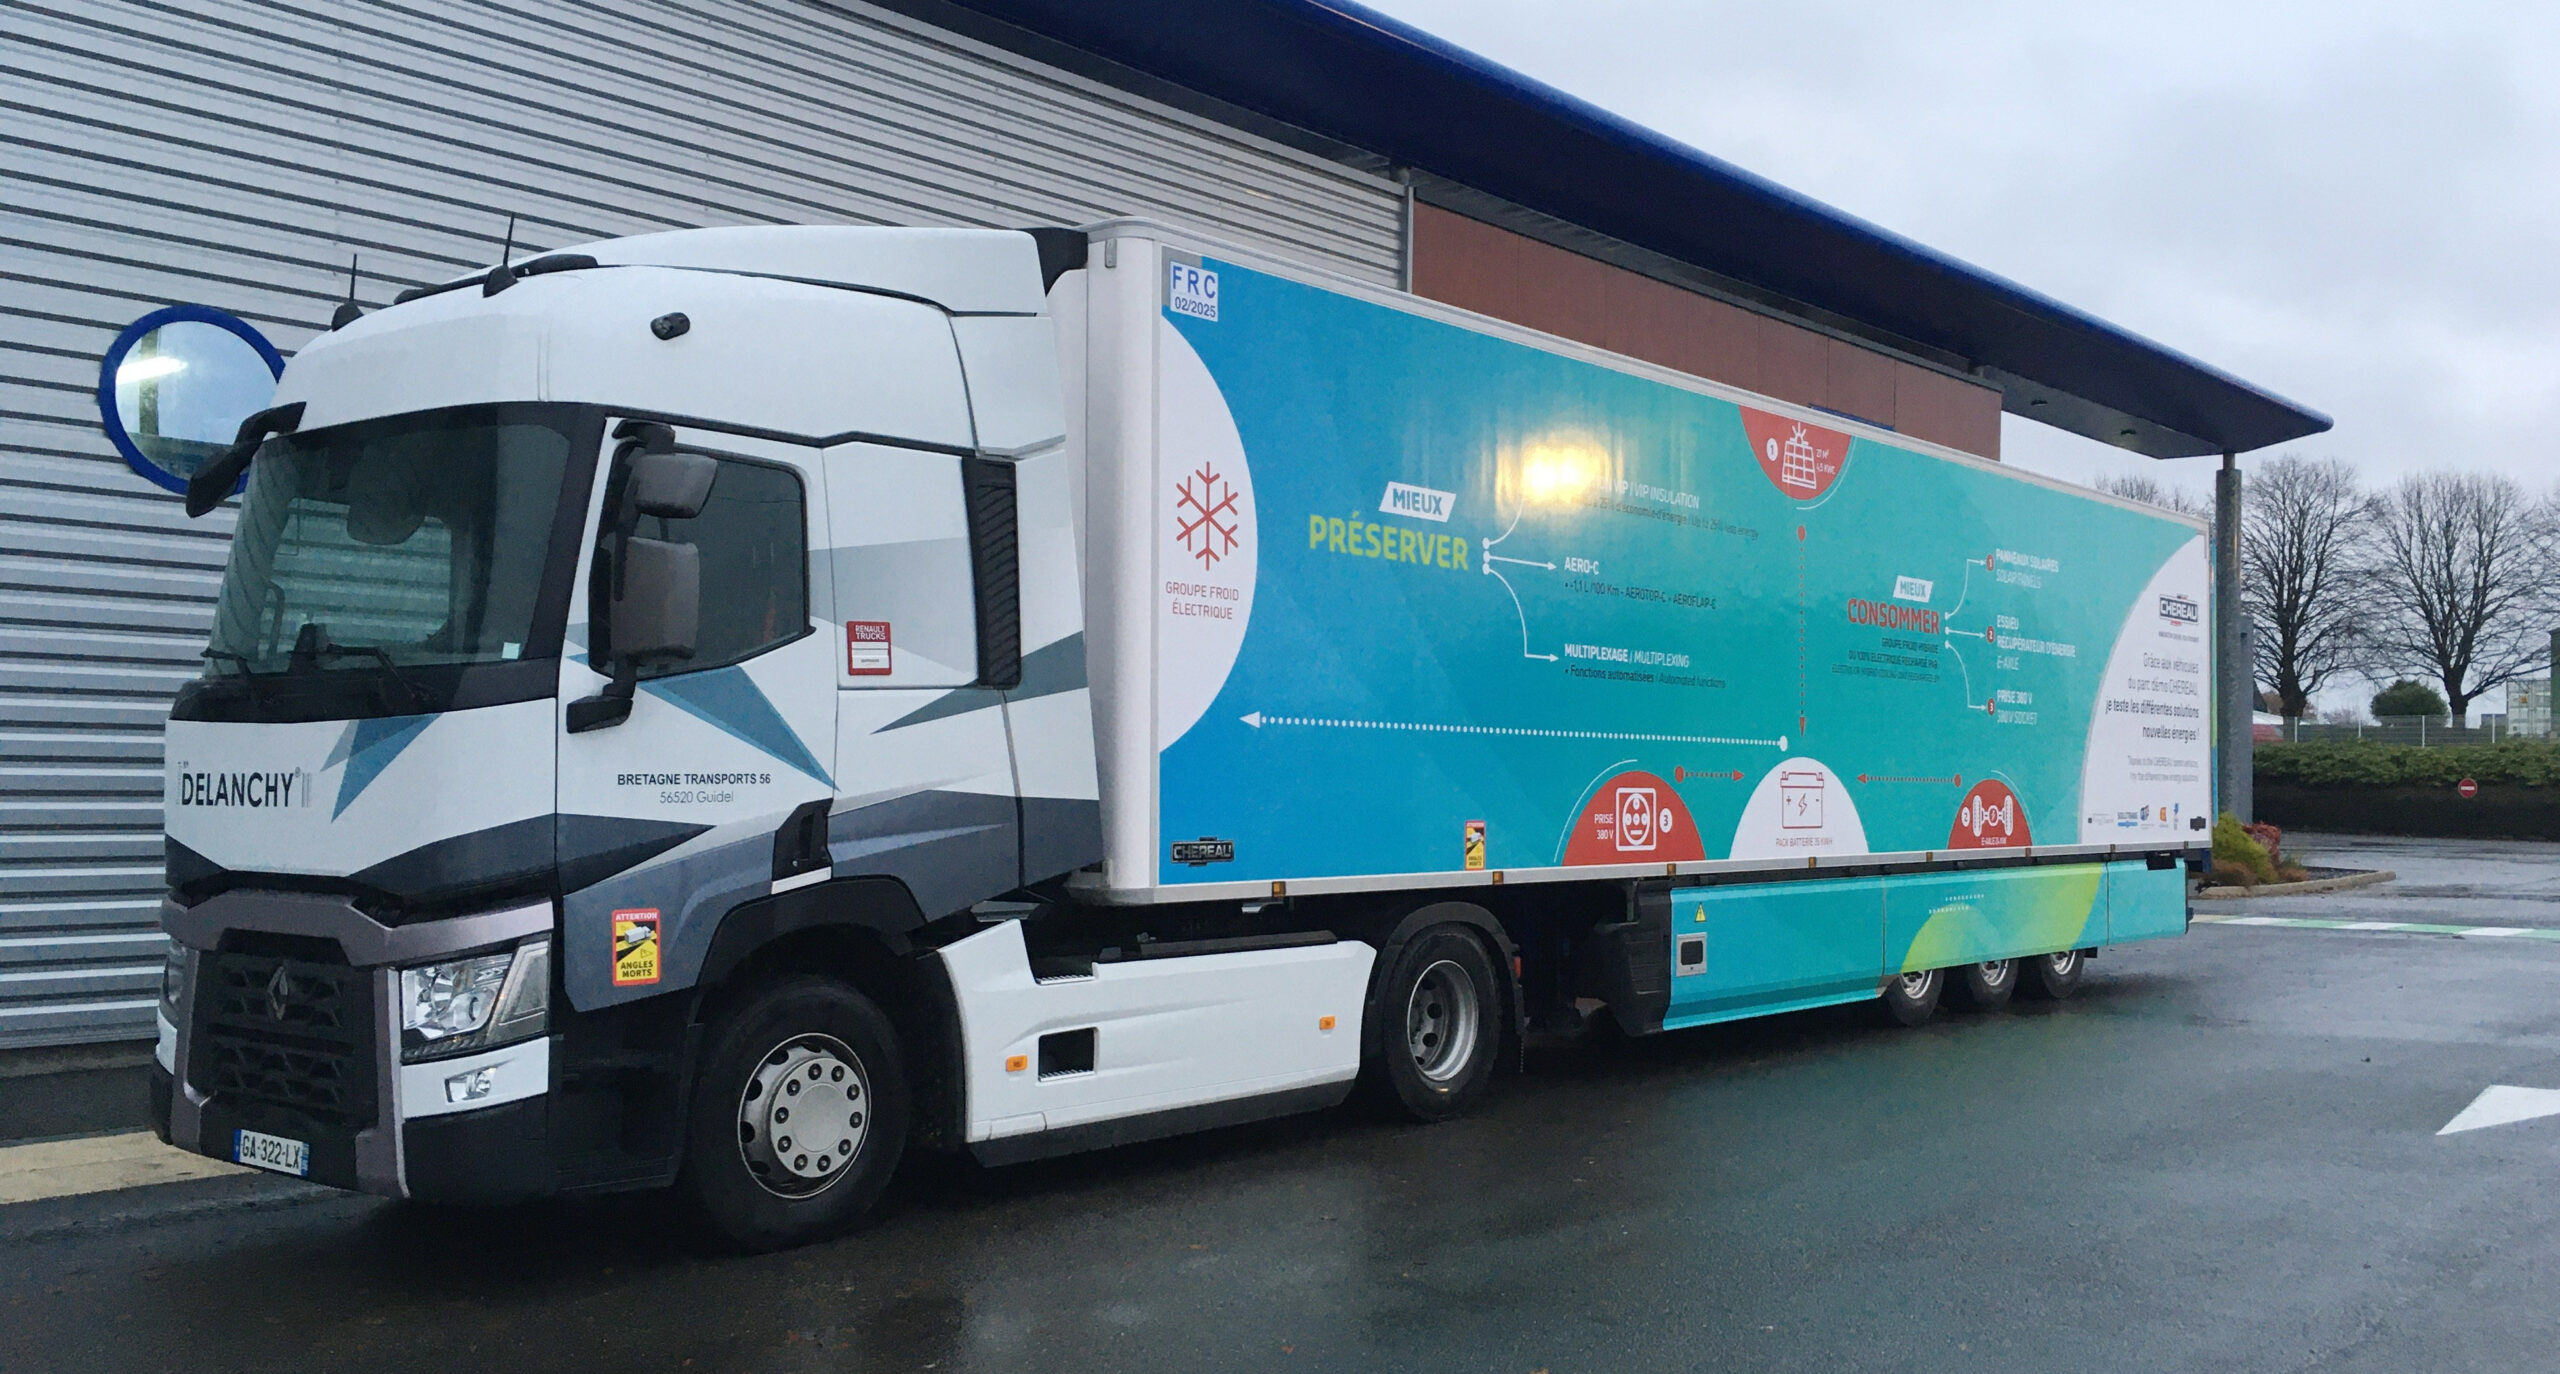 A new prototype semi-trailer under test at DELANCHY Group